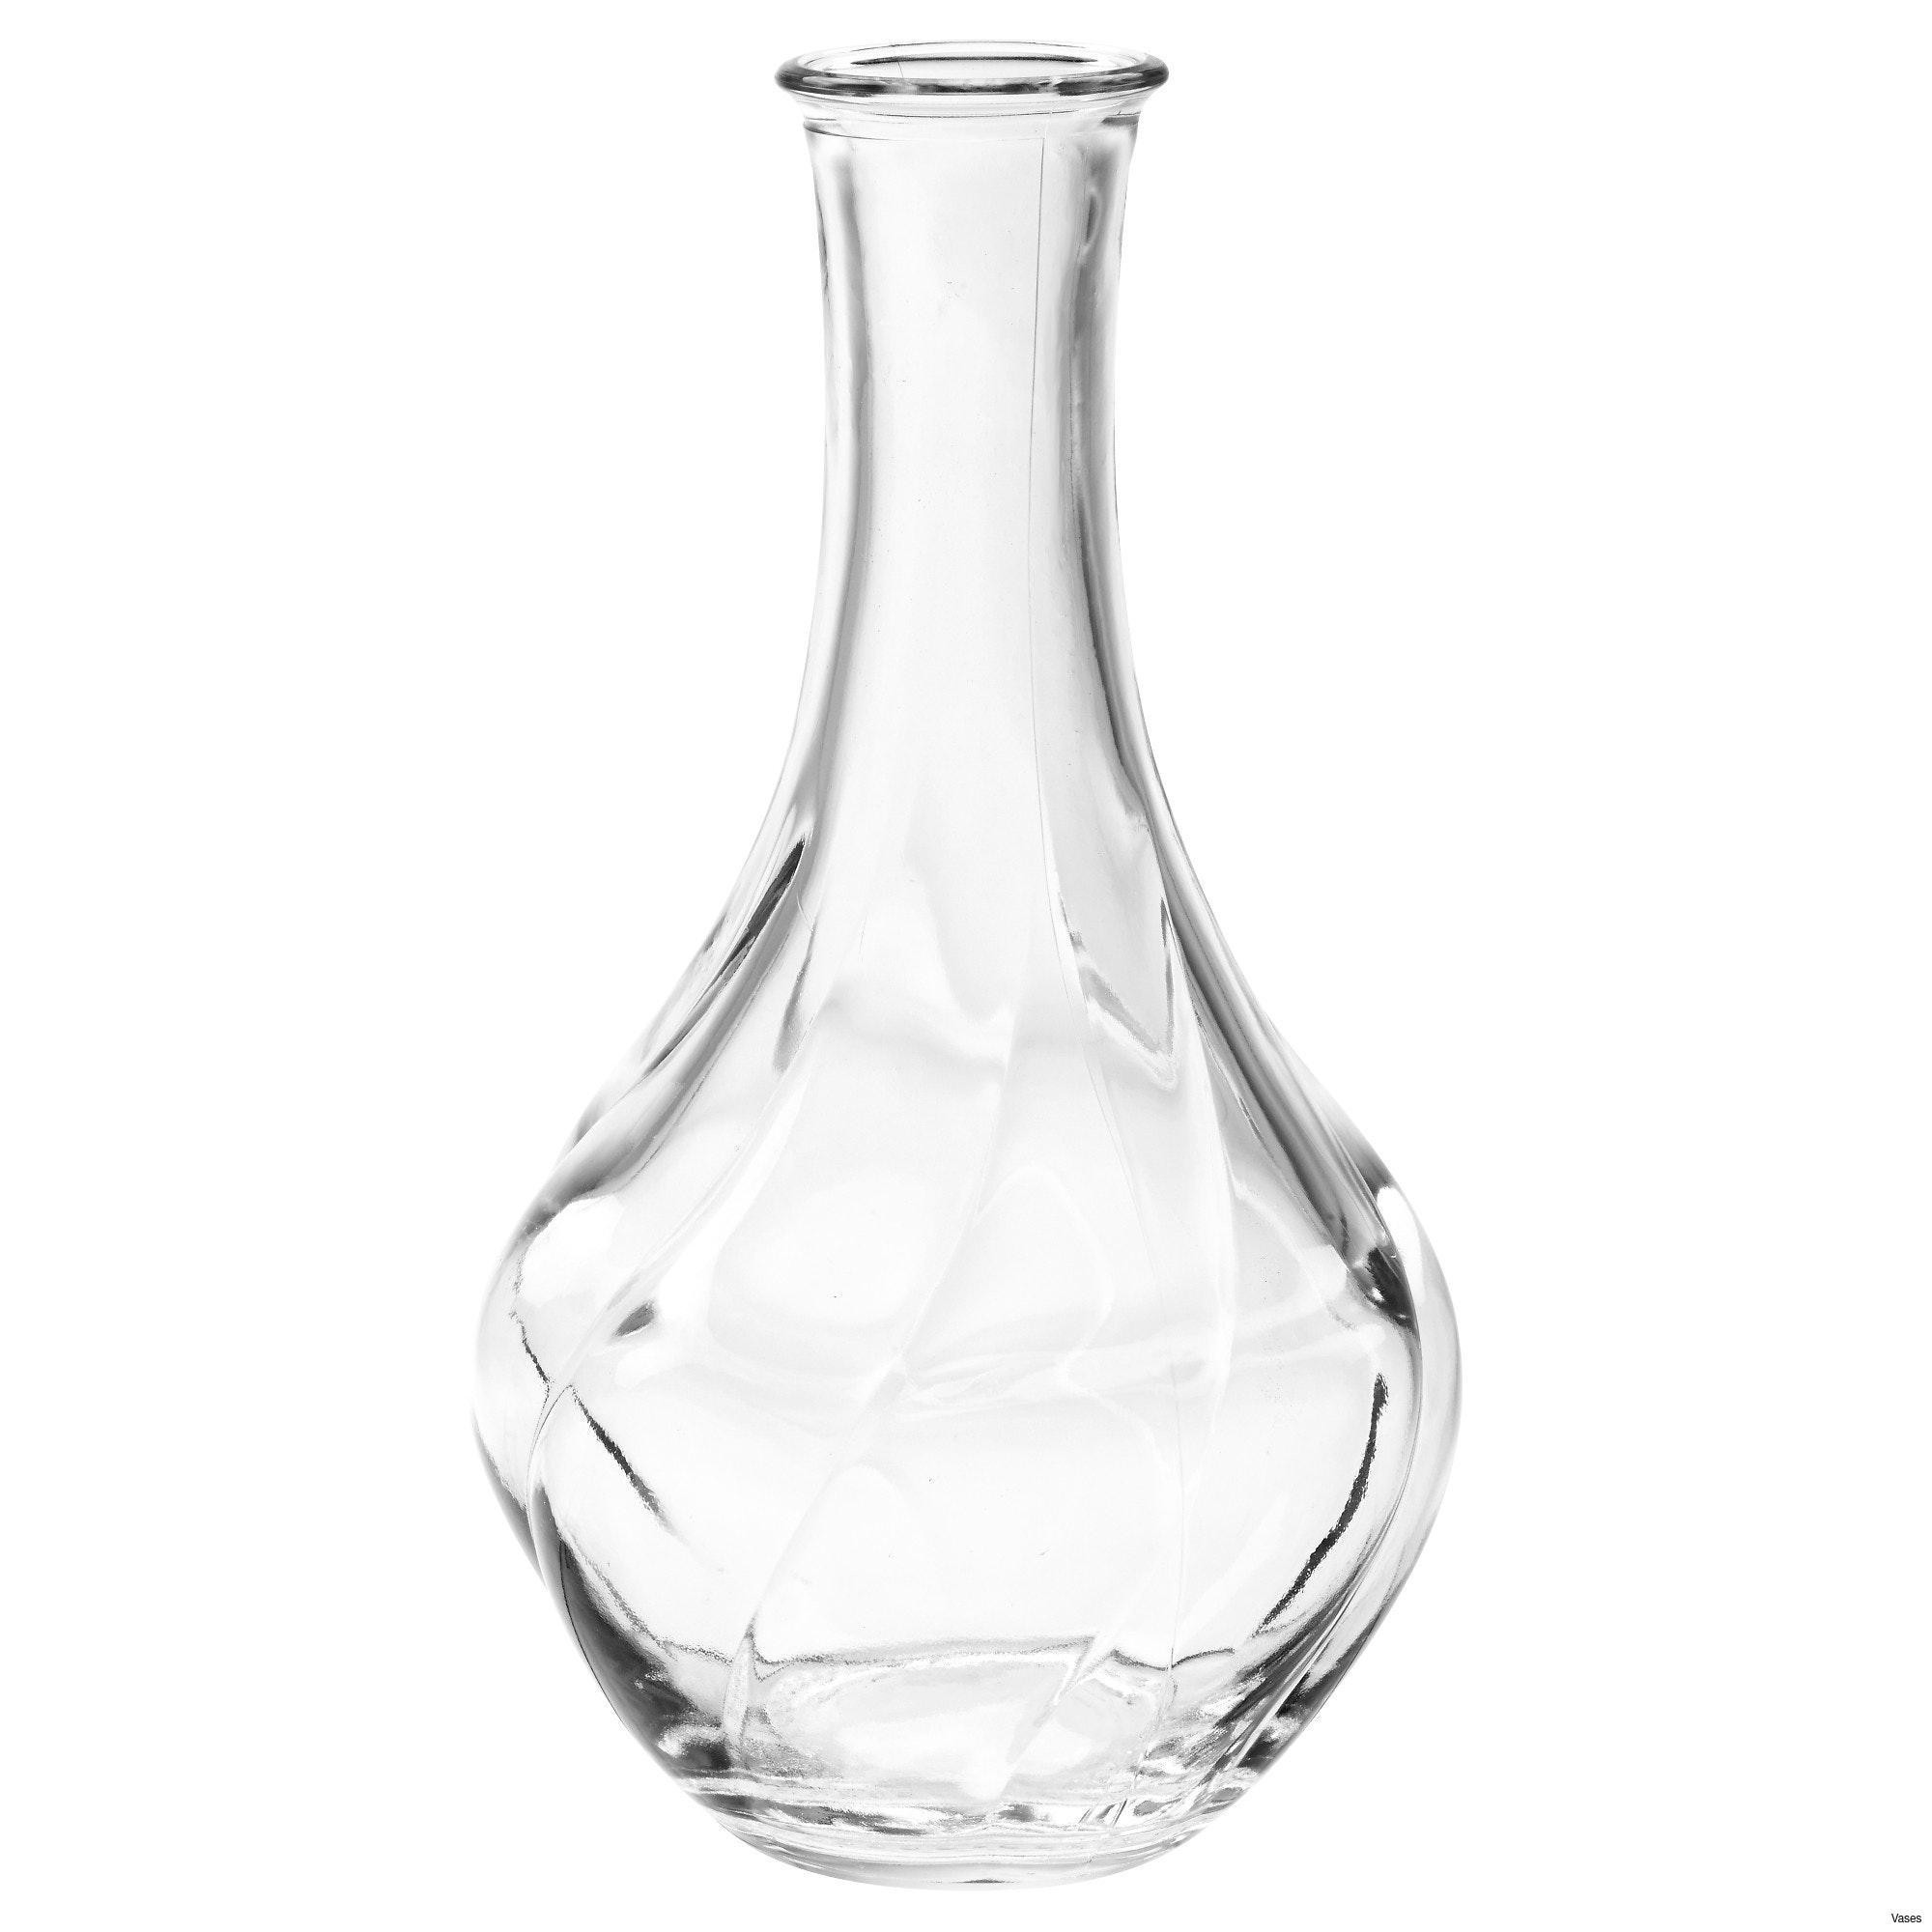 walmart clear glass vases of large glass vases stock 24 inch vases bulk 23 5 flared glass vase with regard to large glass vases gallery living room glass vases fresh clear vase 0d tags amazing and of